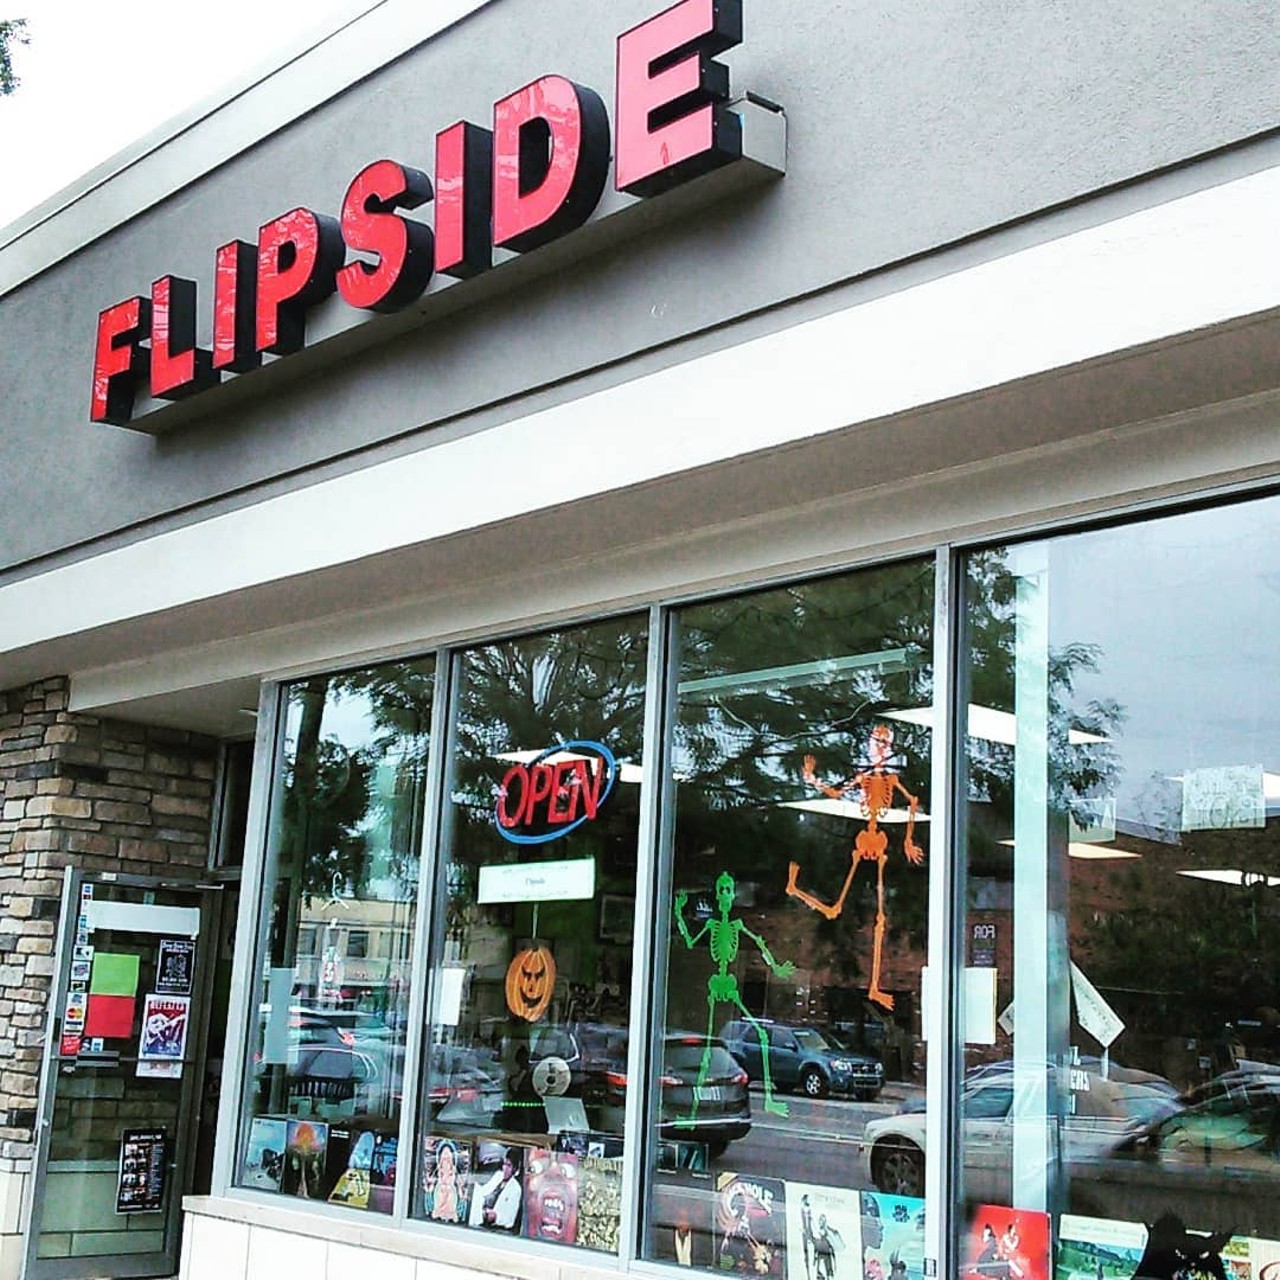 Flipside Records
41 E. 14 Mile Rd., Clawson; 248-585-4090; shopflipsiderecords
After it started selling records independently in 1980, Flipside Records got the storefront treatment and quickly expanded to offer T-shirts and other collectibles. Due to downtown development, the store plans to soon relocate to Berkeley, so help them out by taking advantage of their moving sale before their last day in Clawson on Dec. 26, 2021.
Photo via Flipside Records/Facebook